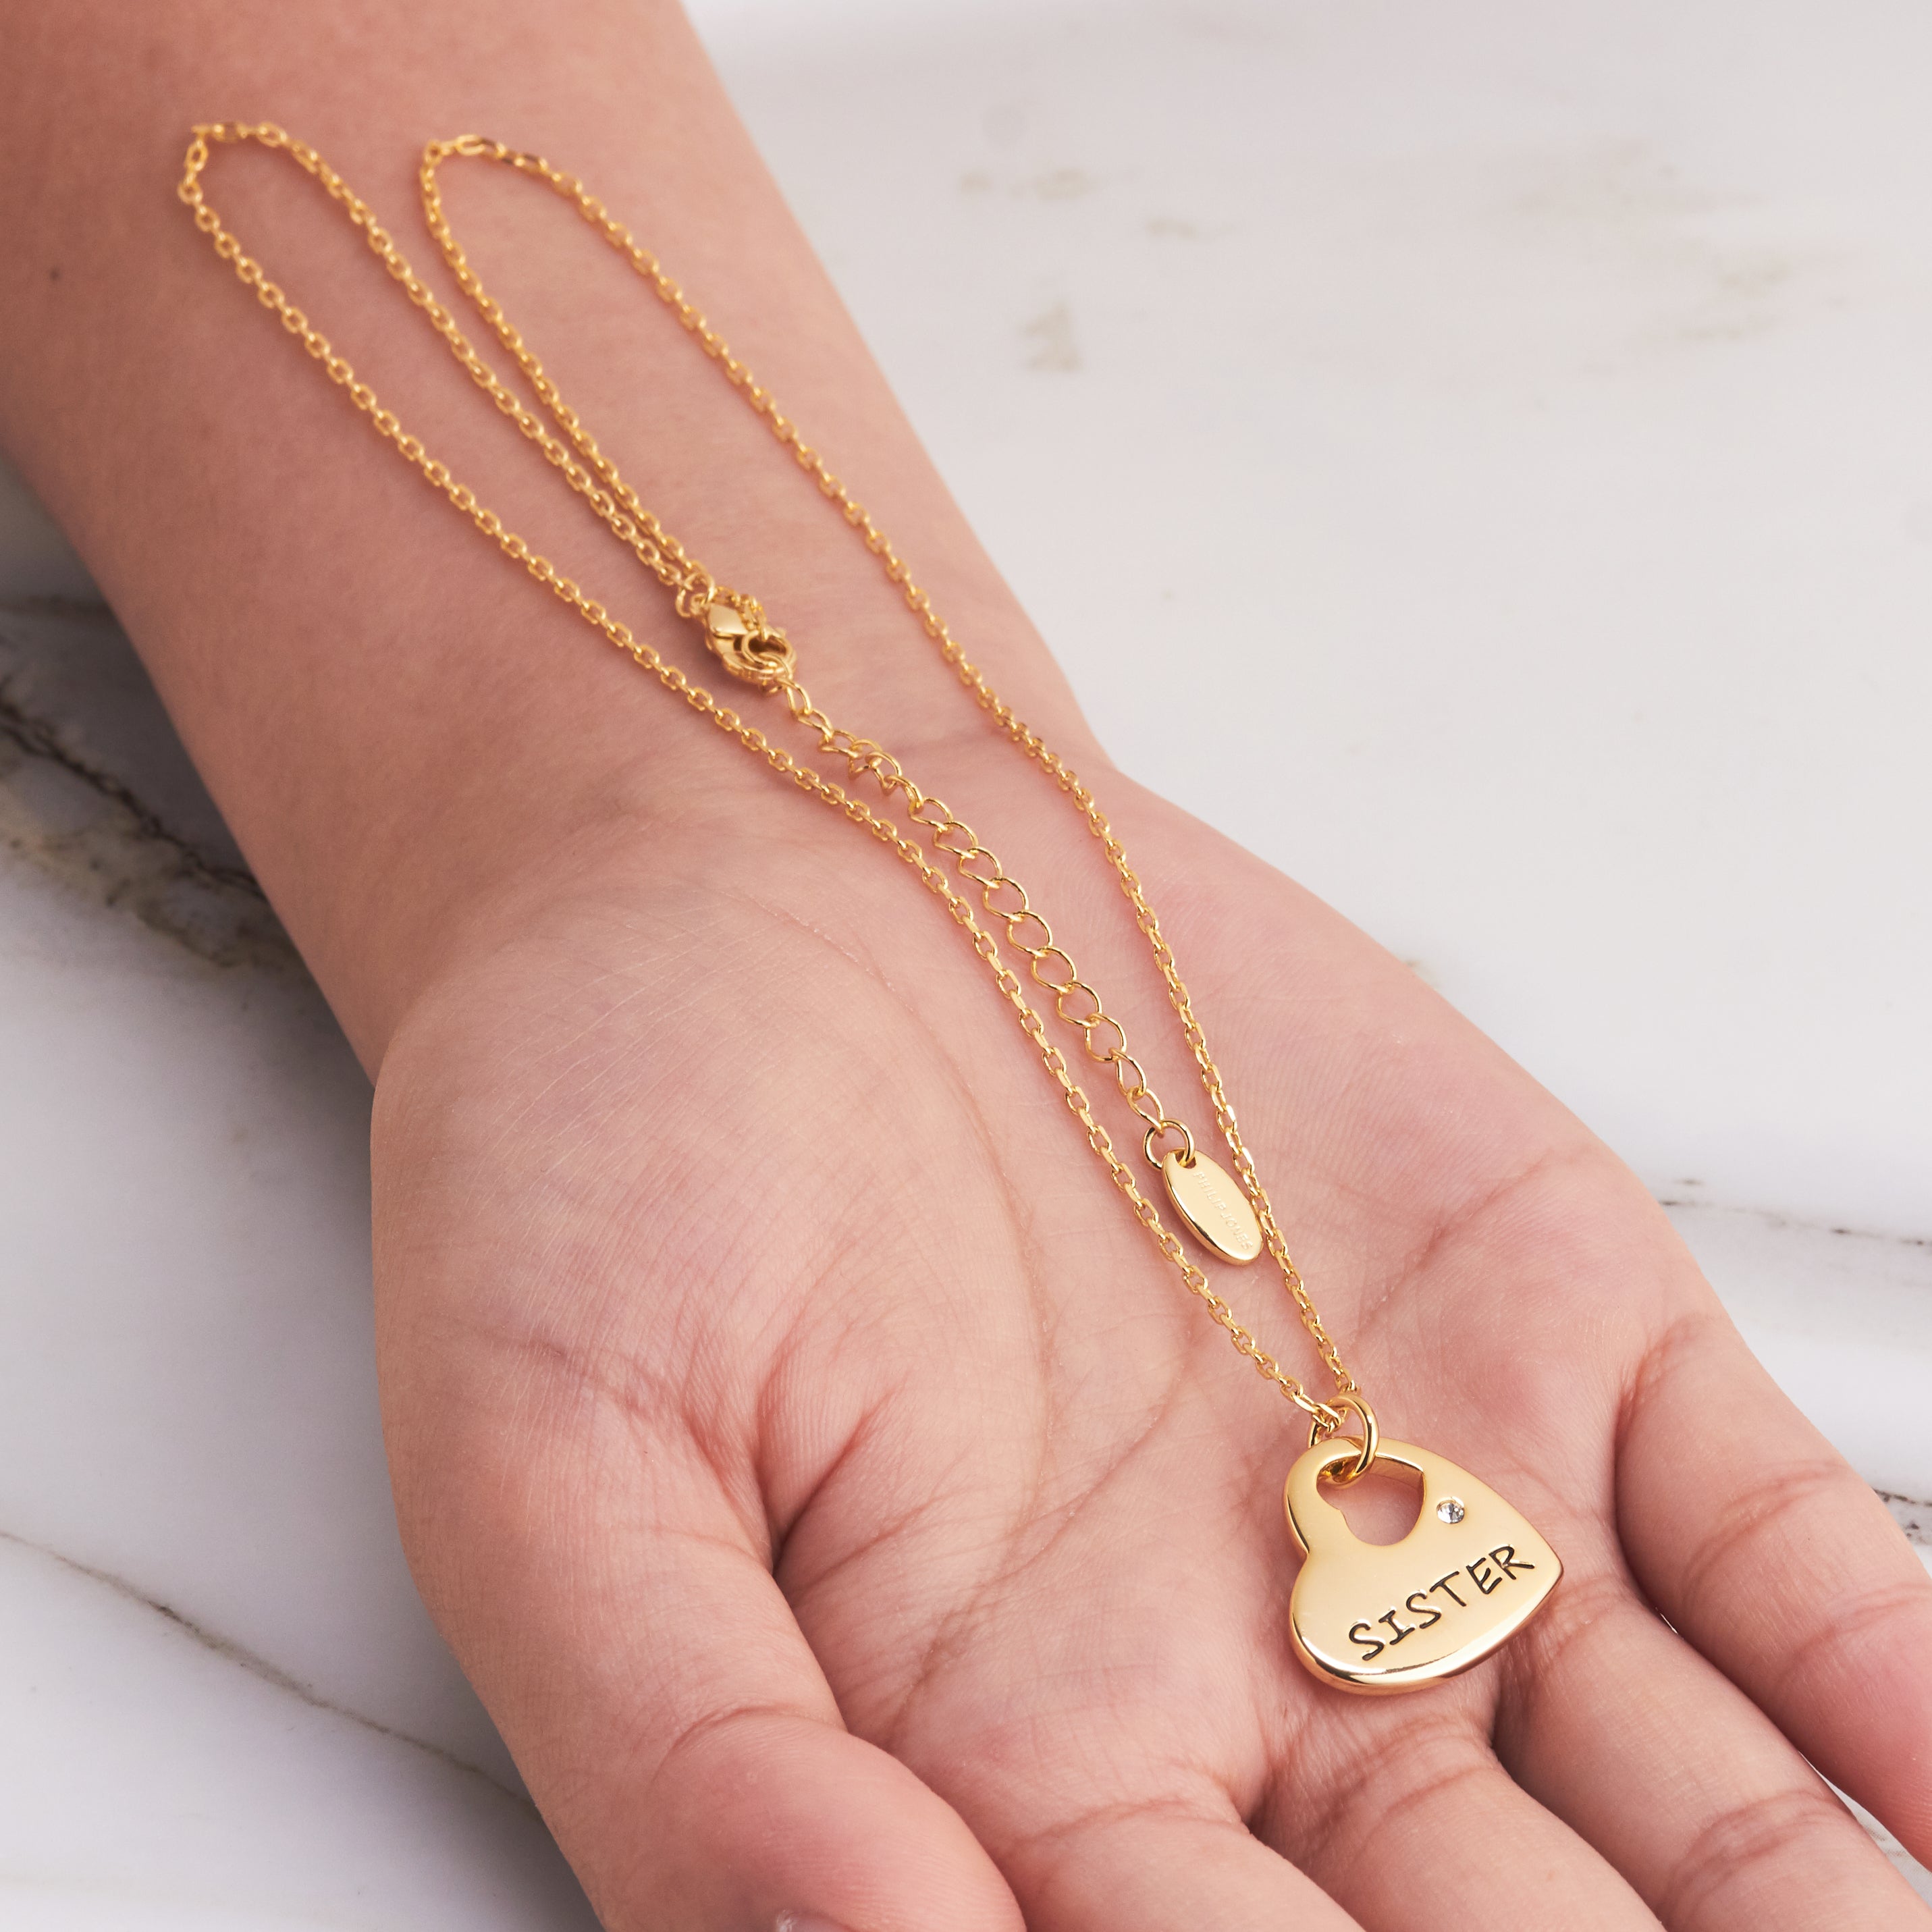 Gold Plated Sister Heart Necklace Created with Zircondia® Crystals